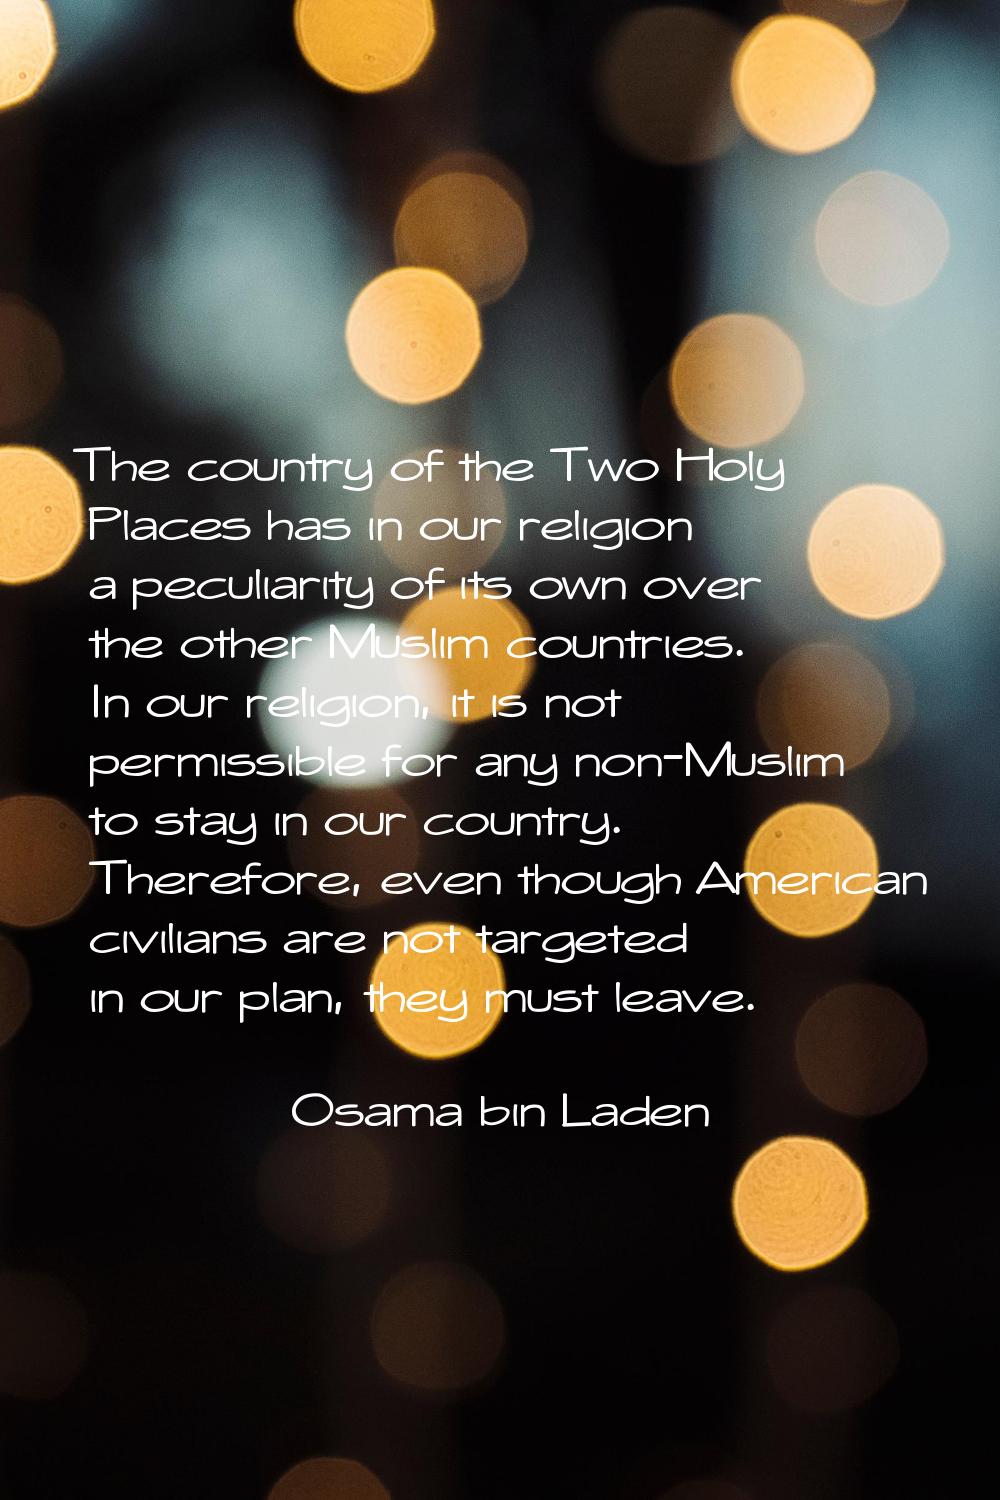 The country of the Two Holy Places has in our religion a peculiarity of its own over the other Musl